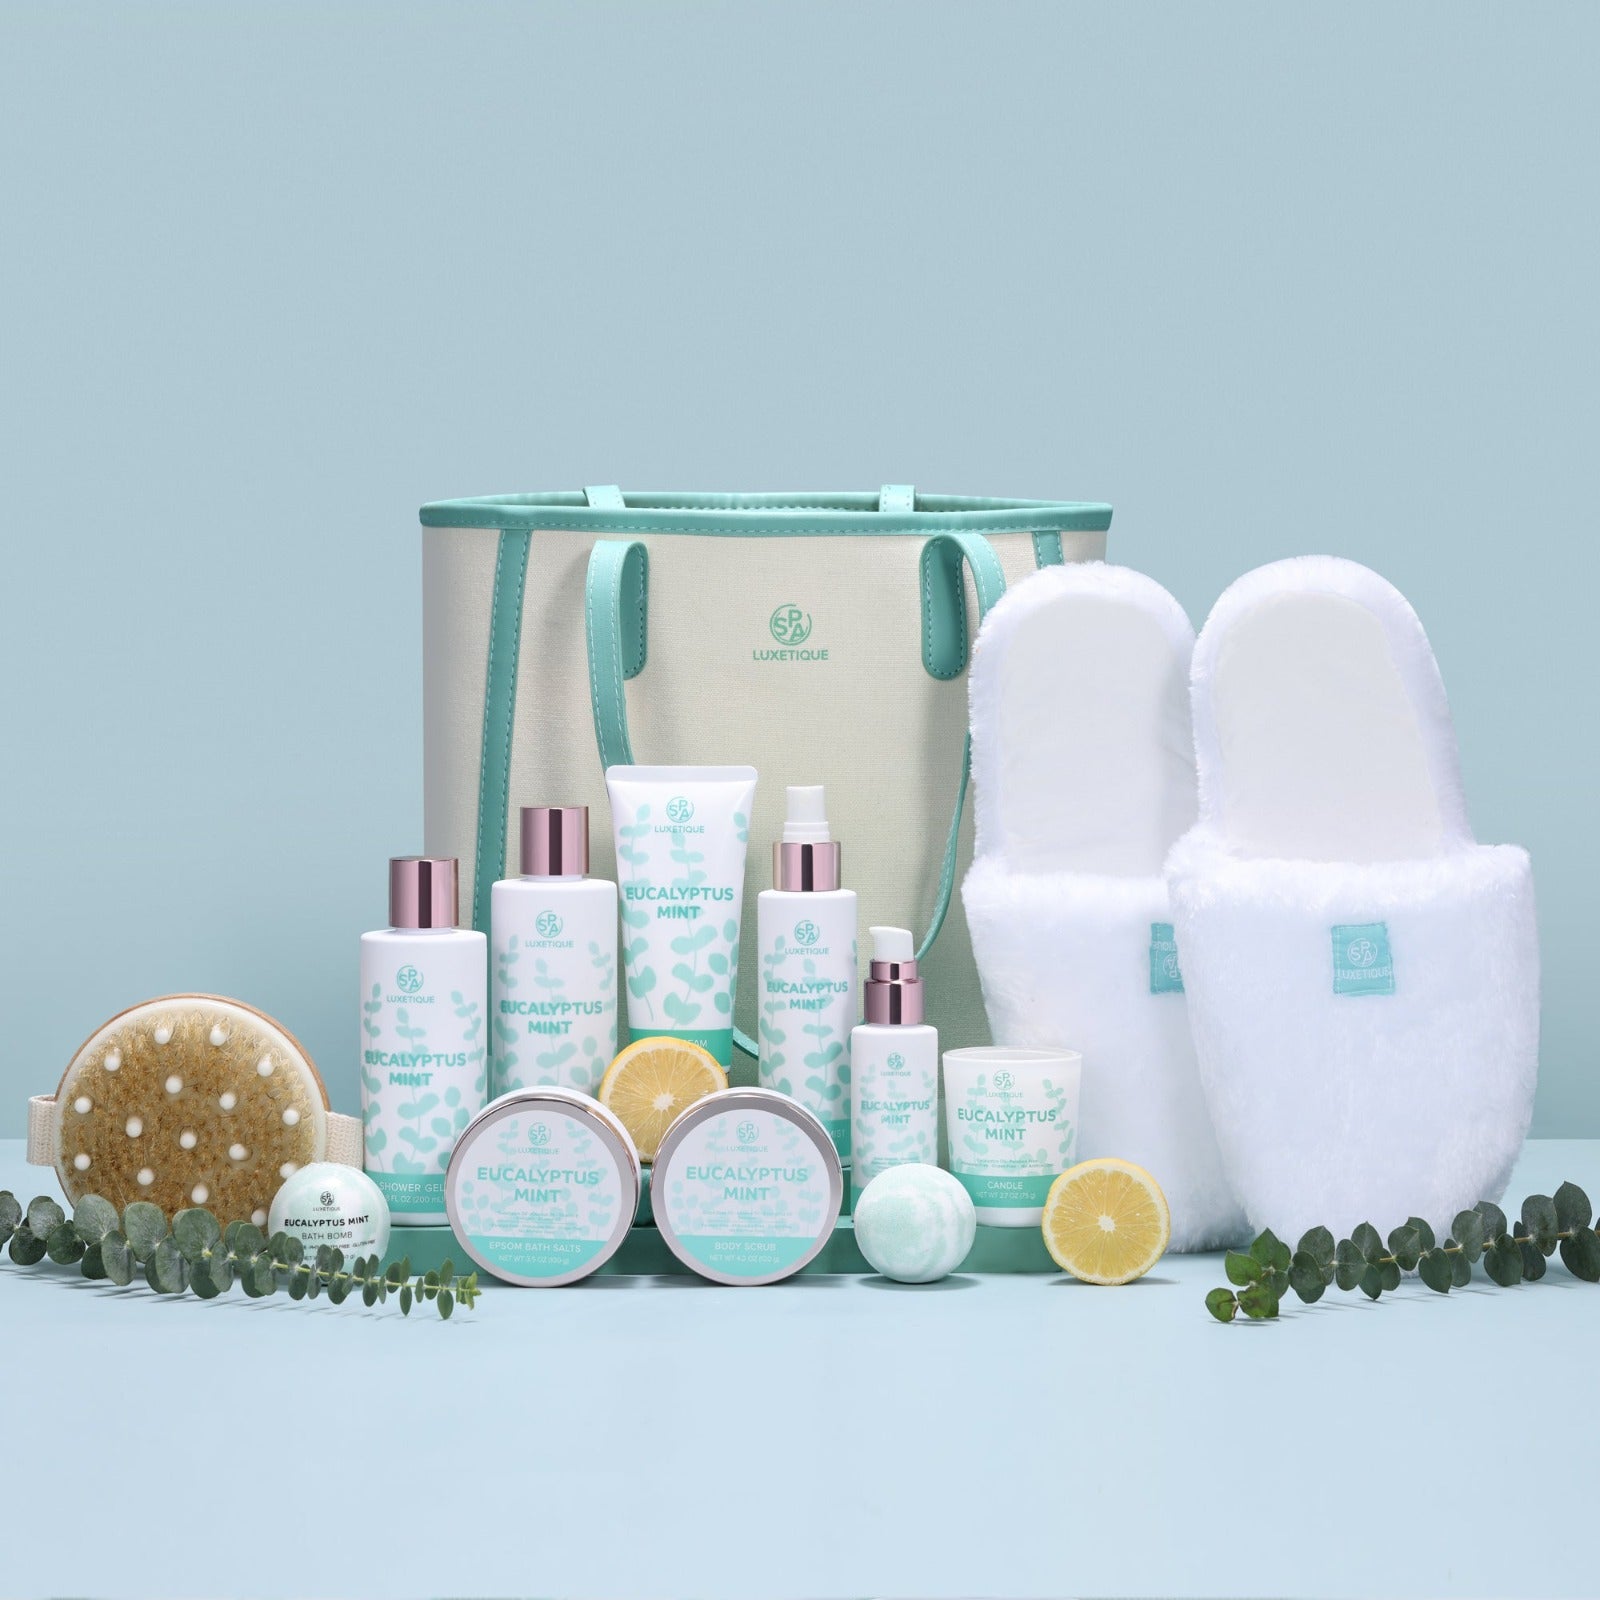 12pcs Gift Bags Eucalyptus Mint Gift Set. Treat your loved one to a rejuvenating spa day with our dedicated gift set, perfect for special moments. Indulge in the cooling eucalyptus & mint blend with shower gel, body scrub, oil, brush & more. Infused with natural ingredients for refreshed skin. Top notes of eucalyptus, spearmint & mint, middle notes of lily, base notes of amber wood. Comes with a versatile exquisite bag for any occasion like Valentine's Day, Spring and Birthday.